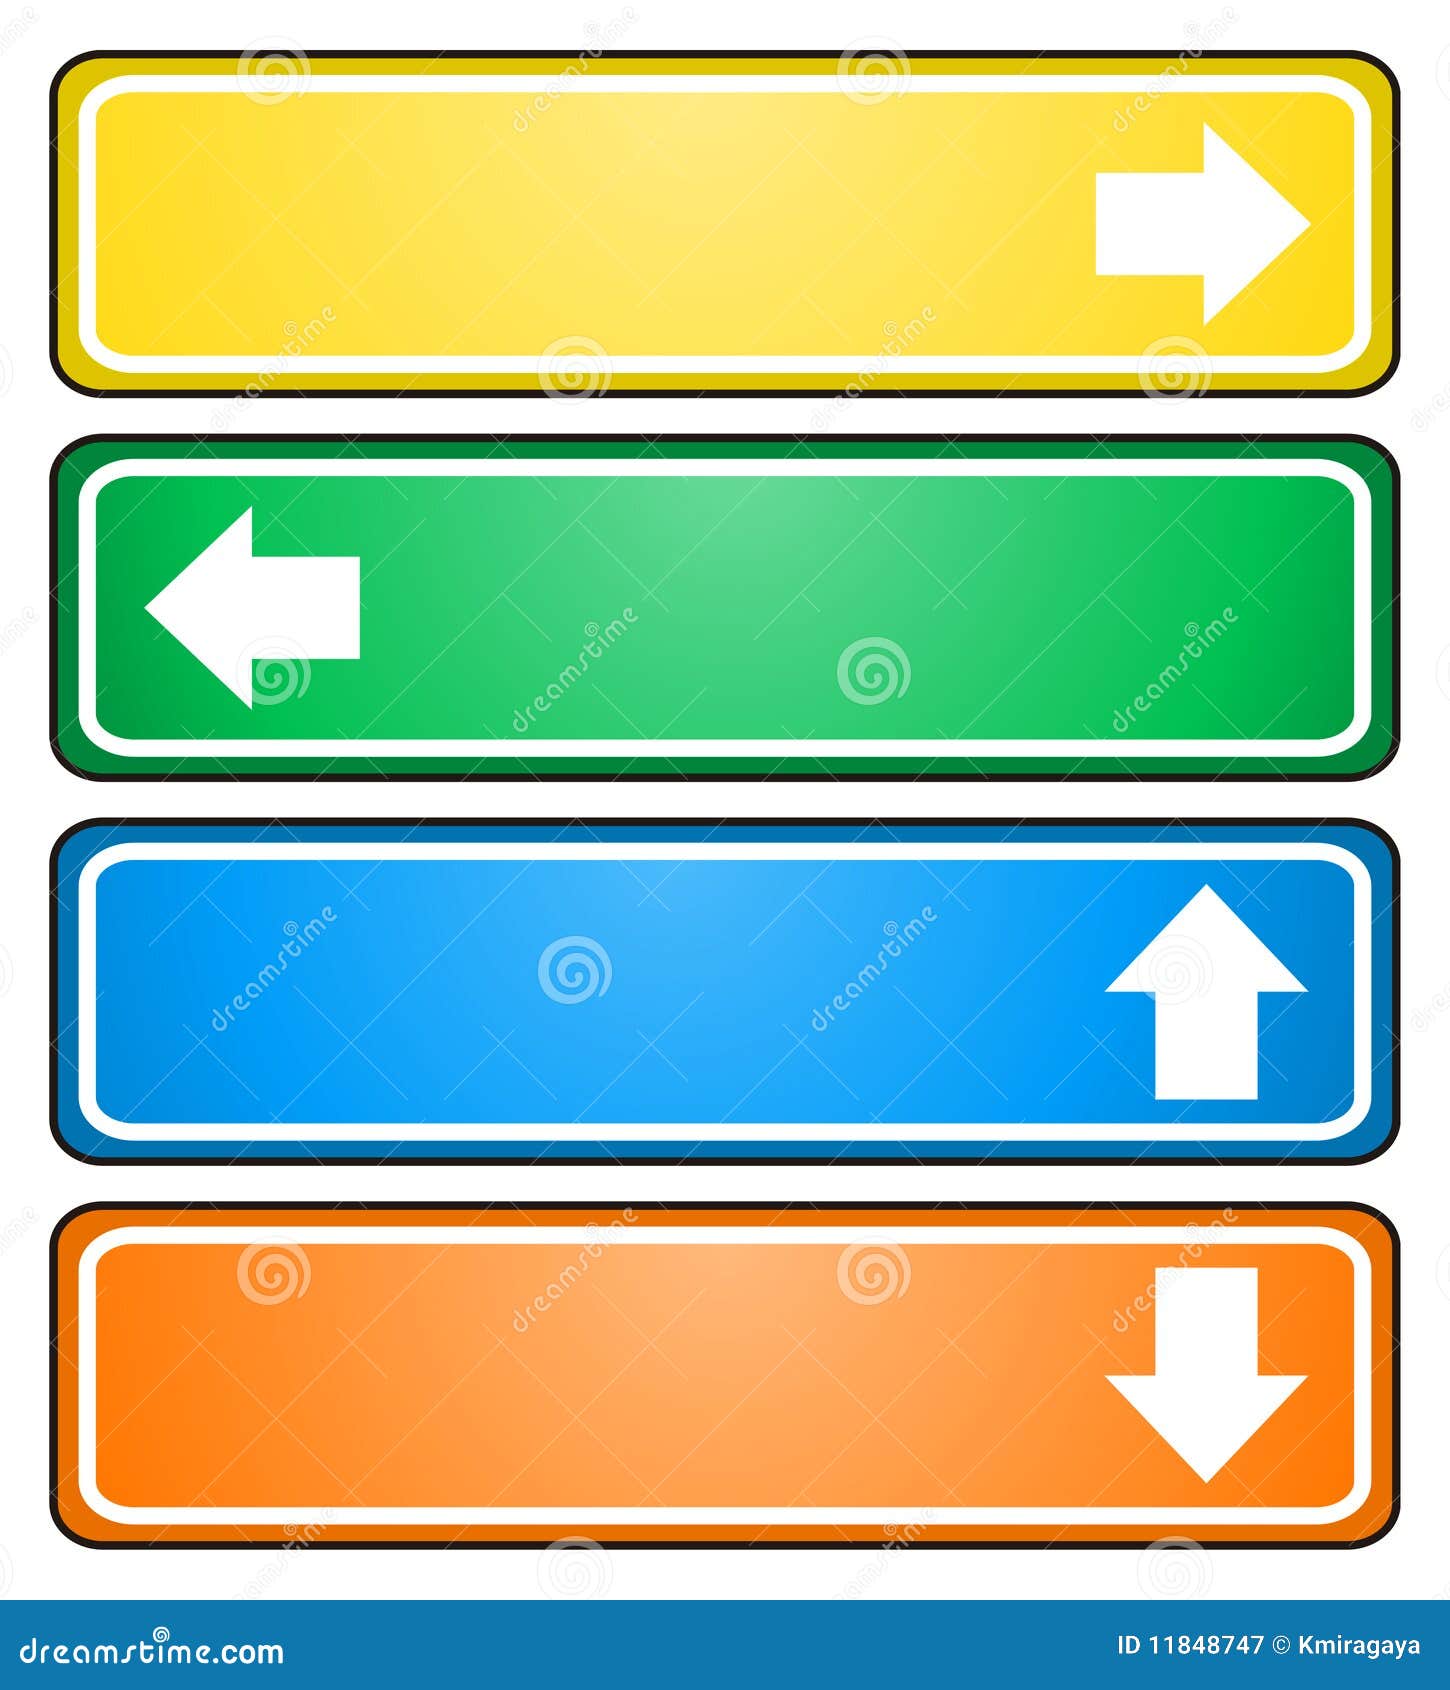 arrow signs pointing to different directions